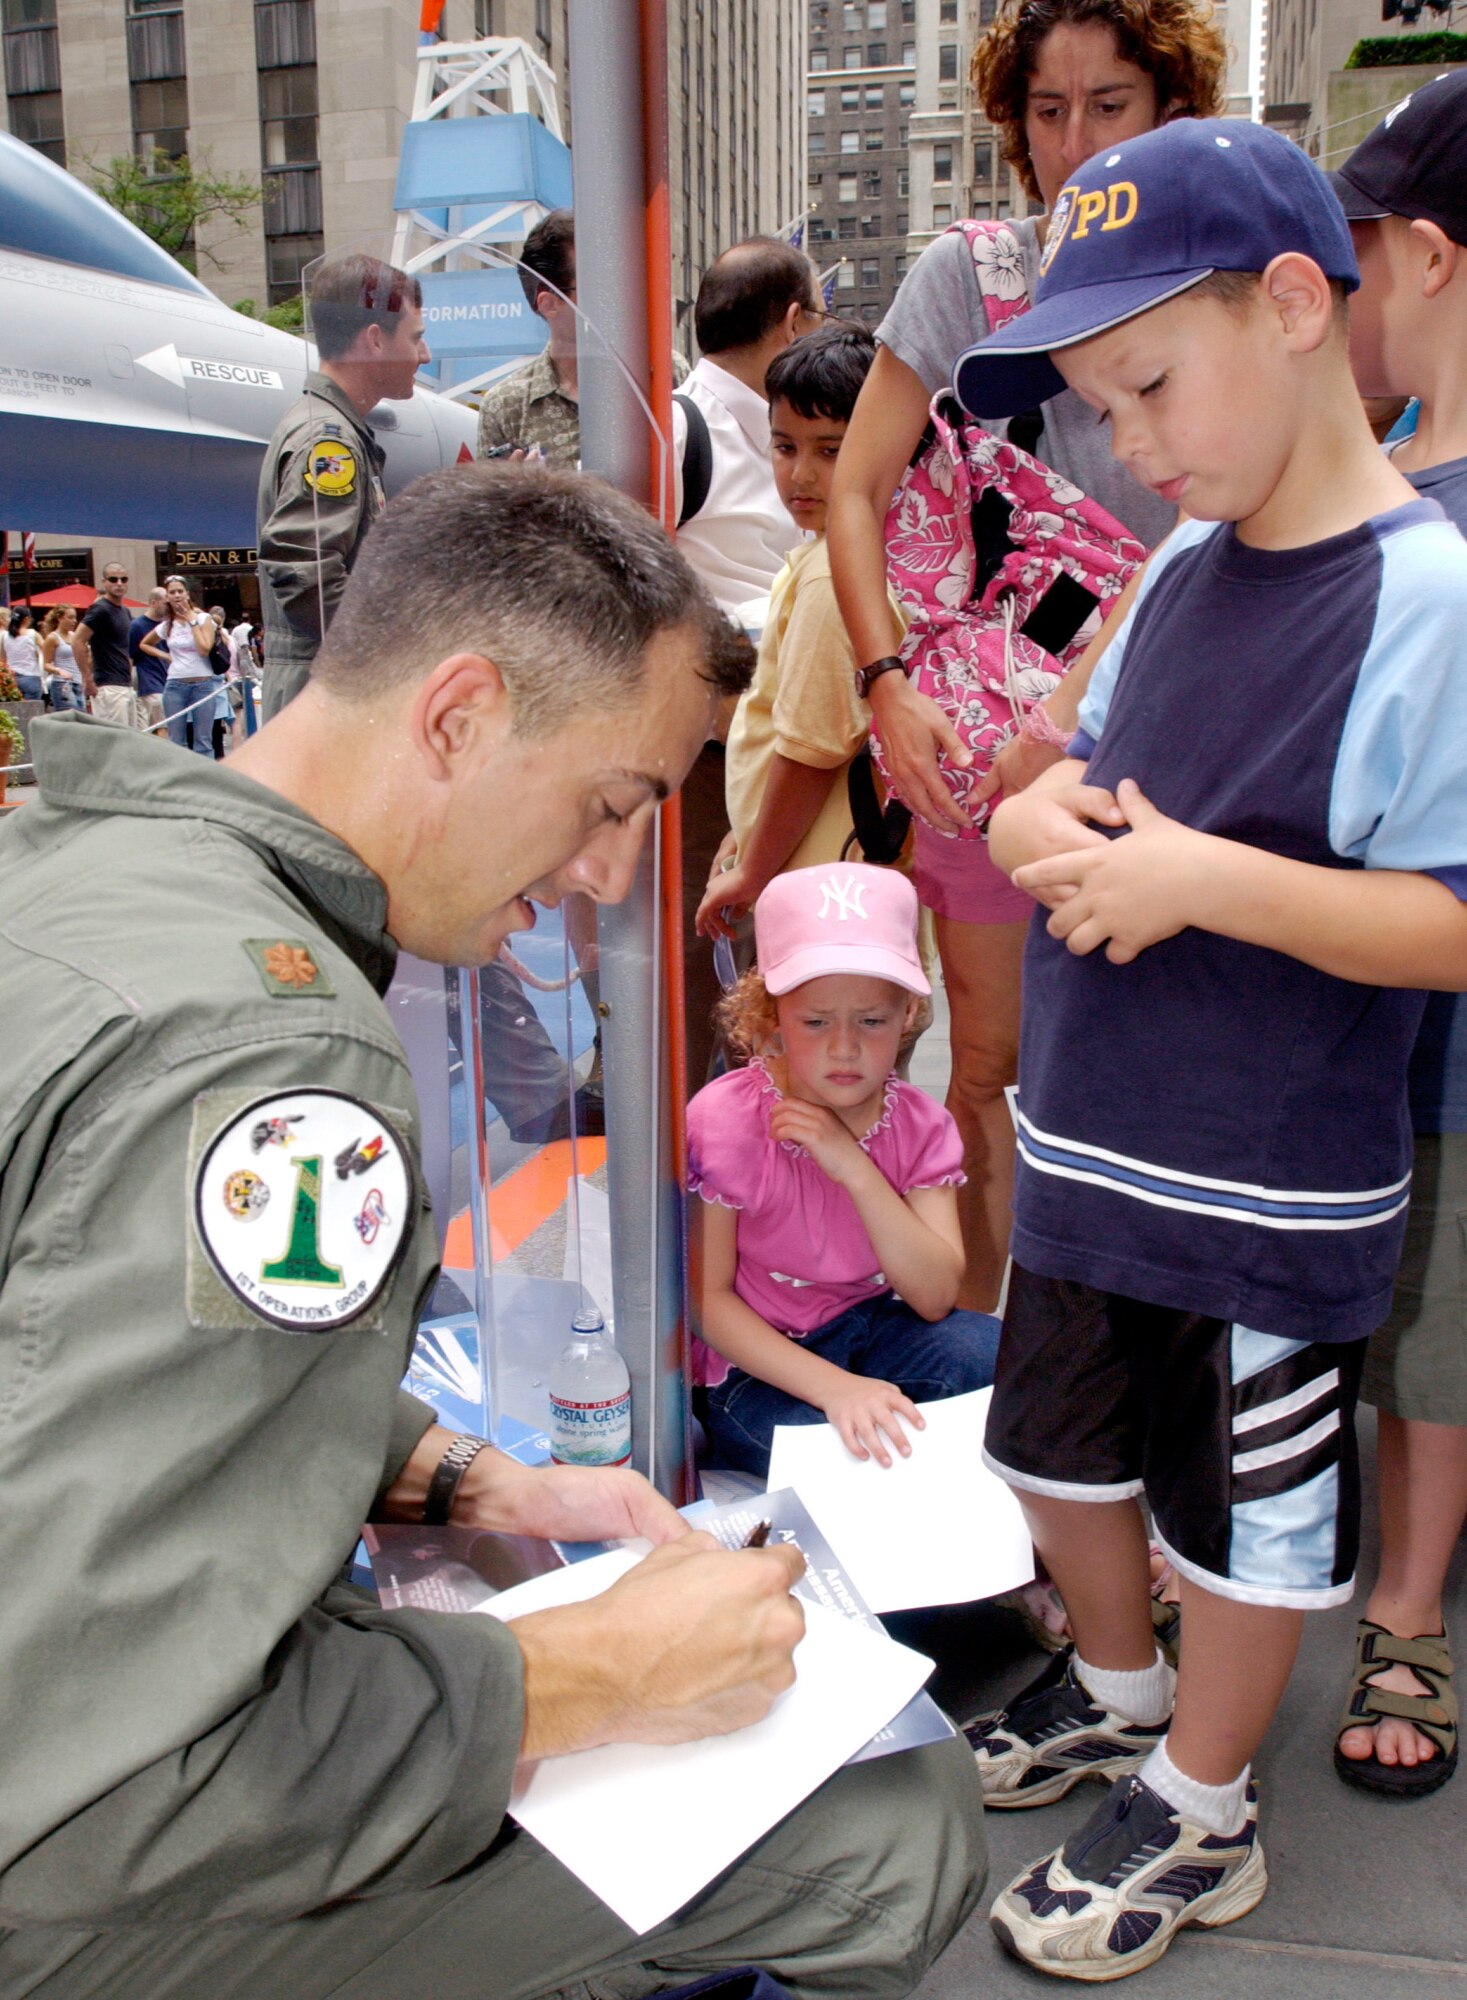 NEW YORK -- Maj. Cory Bower signs an autograph for Harrison, age 6, during a Centennial of Flight celebration Aug. 9 at Rockefeller Center here.  Bower is an F-15 Eagle pilot assigned to the 27th Fighter Squadron at Langley Air Force Base, Va.  (U.S. Air Force photo by Staff Sgt. A.J. Bosker)